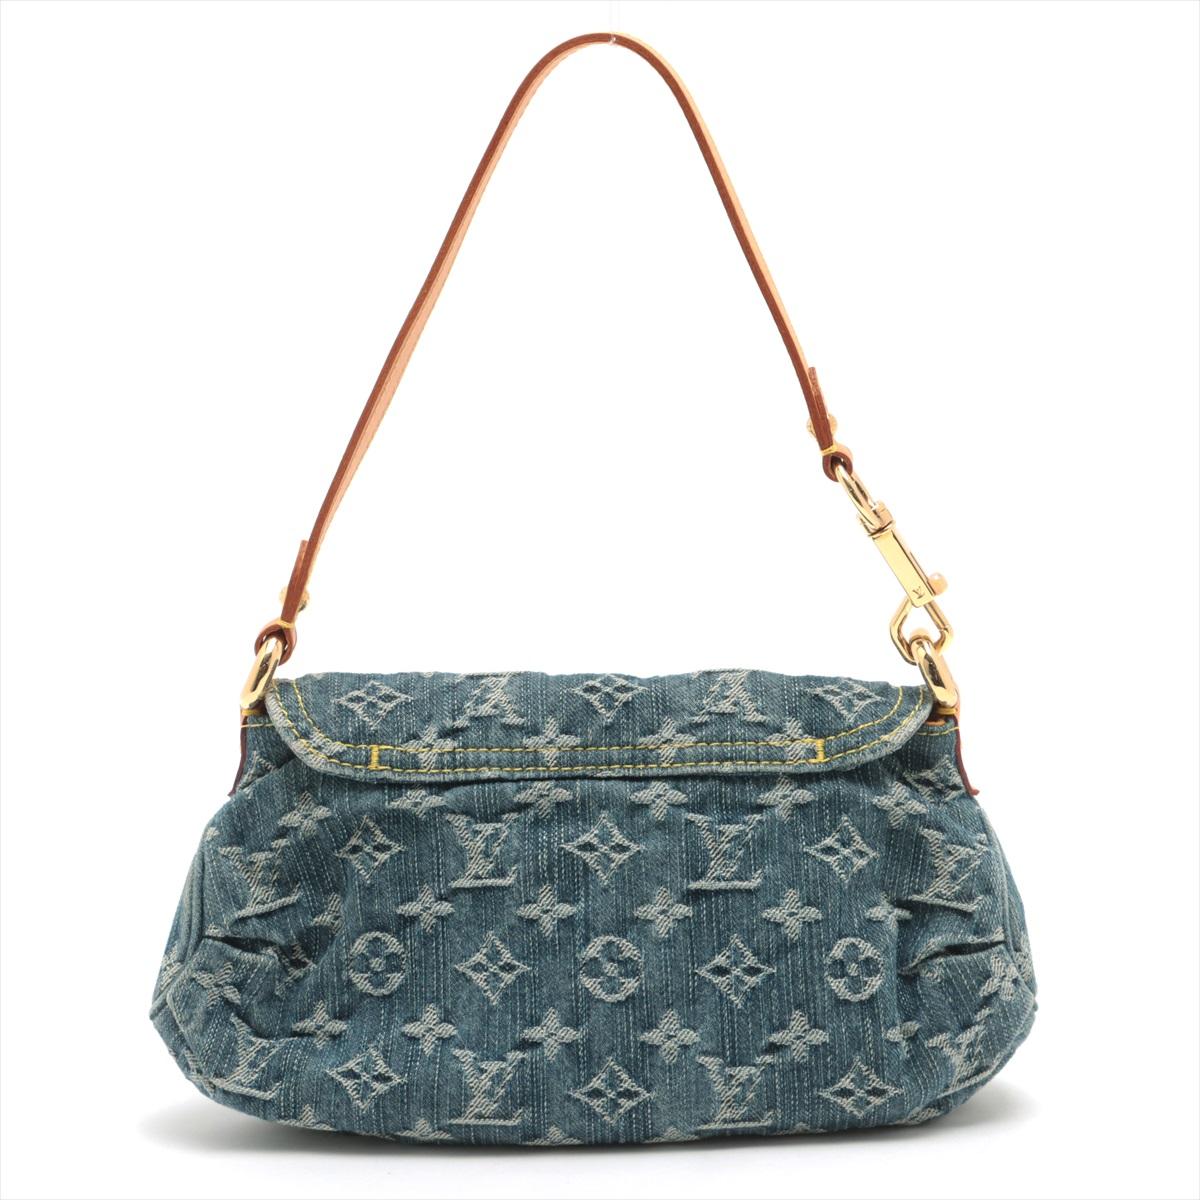 The Louis Vuitton Monogram Denim Mini Pleaty is a charming and fashionable accessory that combines the iconic Louis Vuitton monogram pattern with a contemporary denim twist. Crafted from high-quality denim fabric. The exterior of the bag features